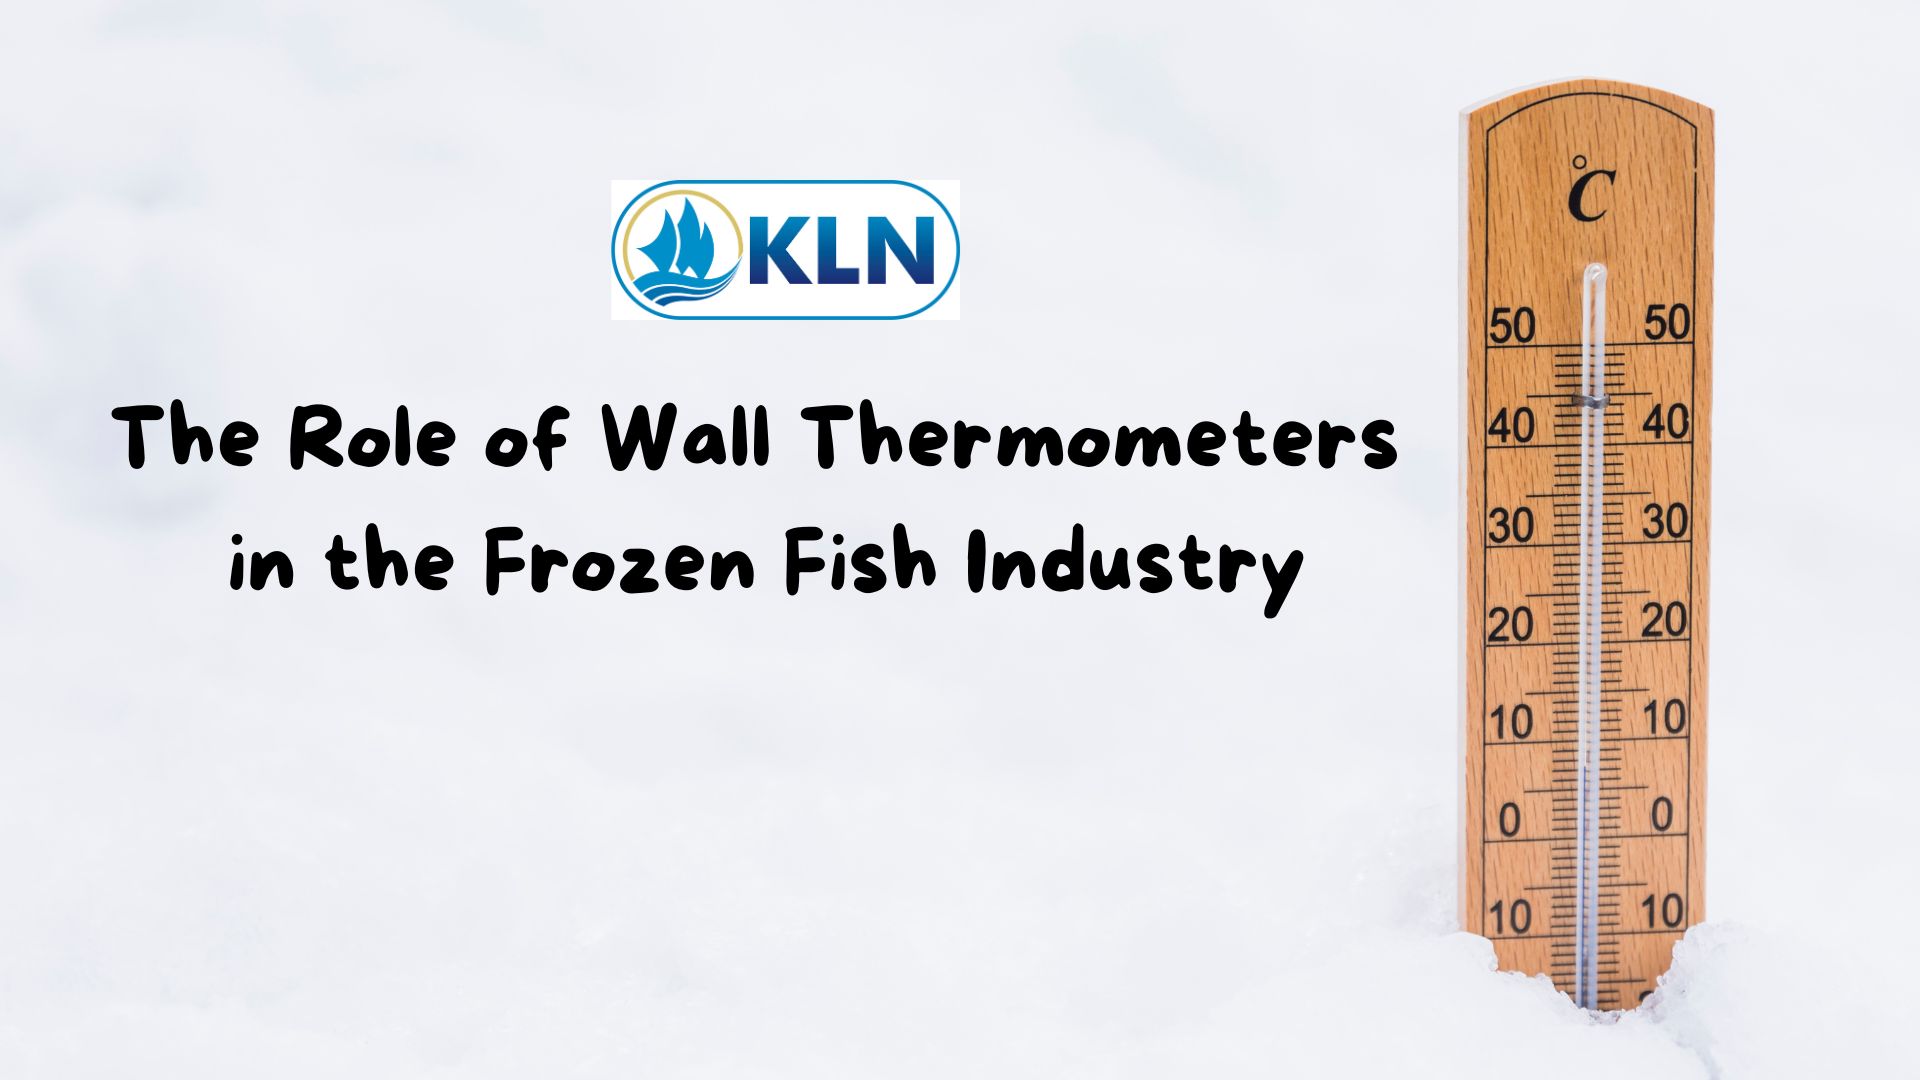 The Role of Wall Thermometers in the Frozen Fish Industry